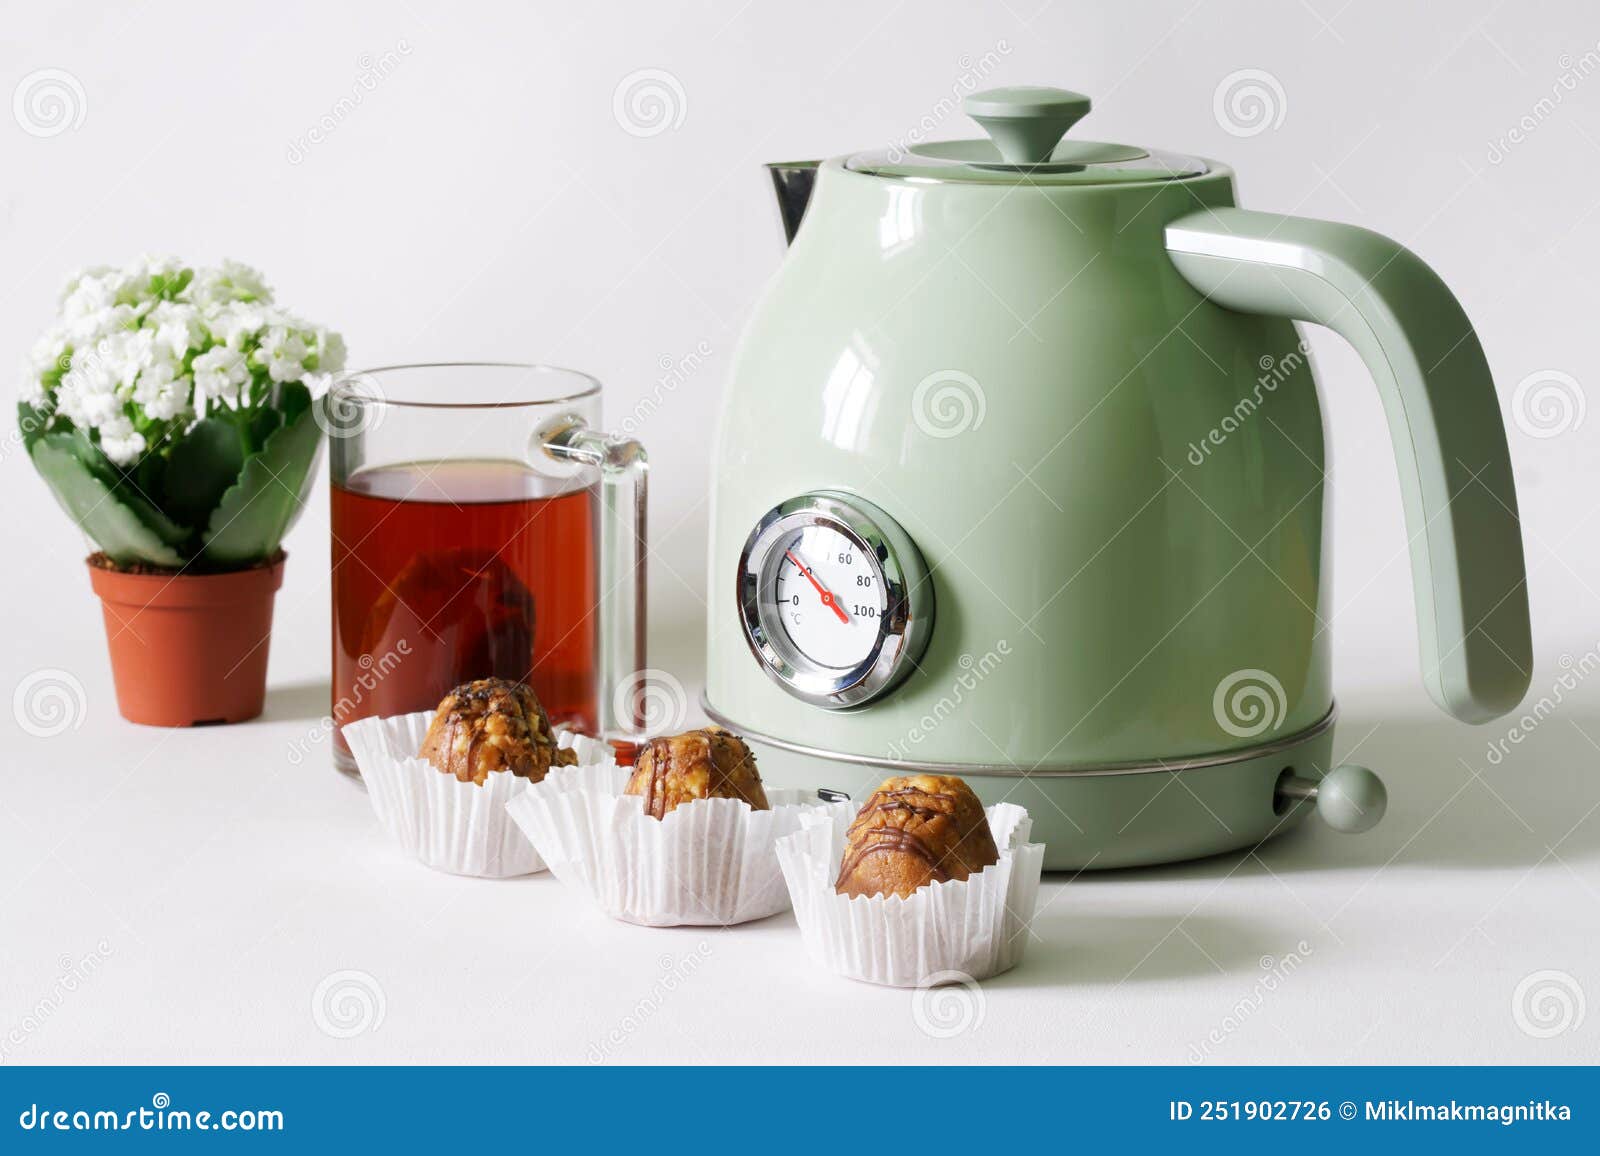 https://thumbs.dreamstime.com/z/delicate-green-vintage-teapot-thermometer-stands-next-to-cakes-mug-poured-tea-tea-bag-small-pot-white-spring-251902726.jpg